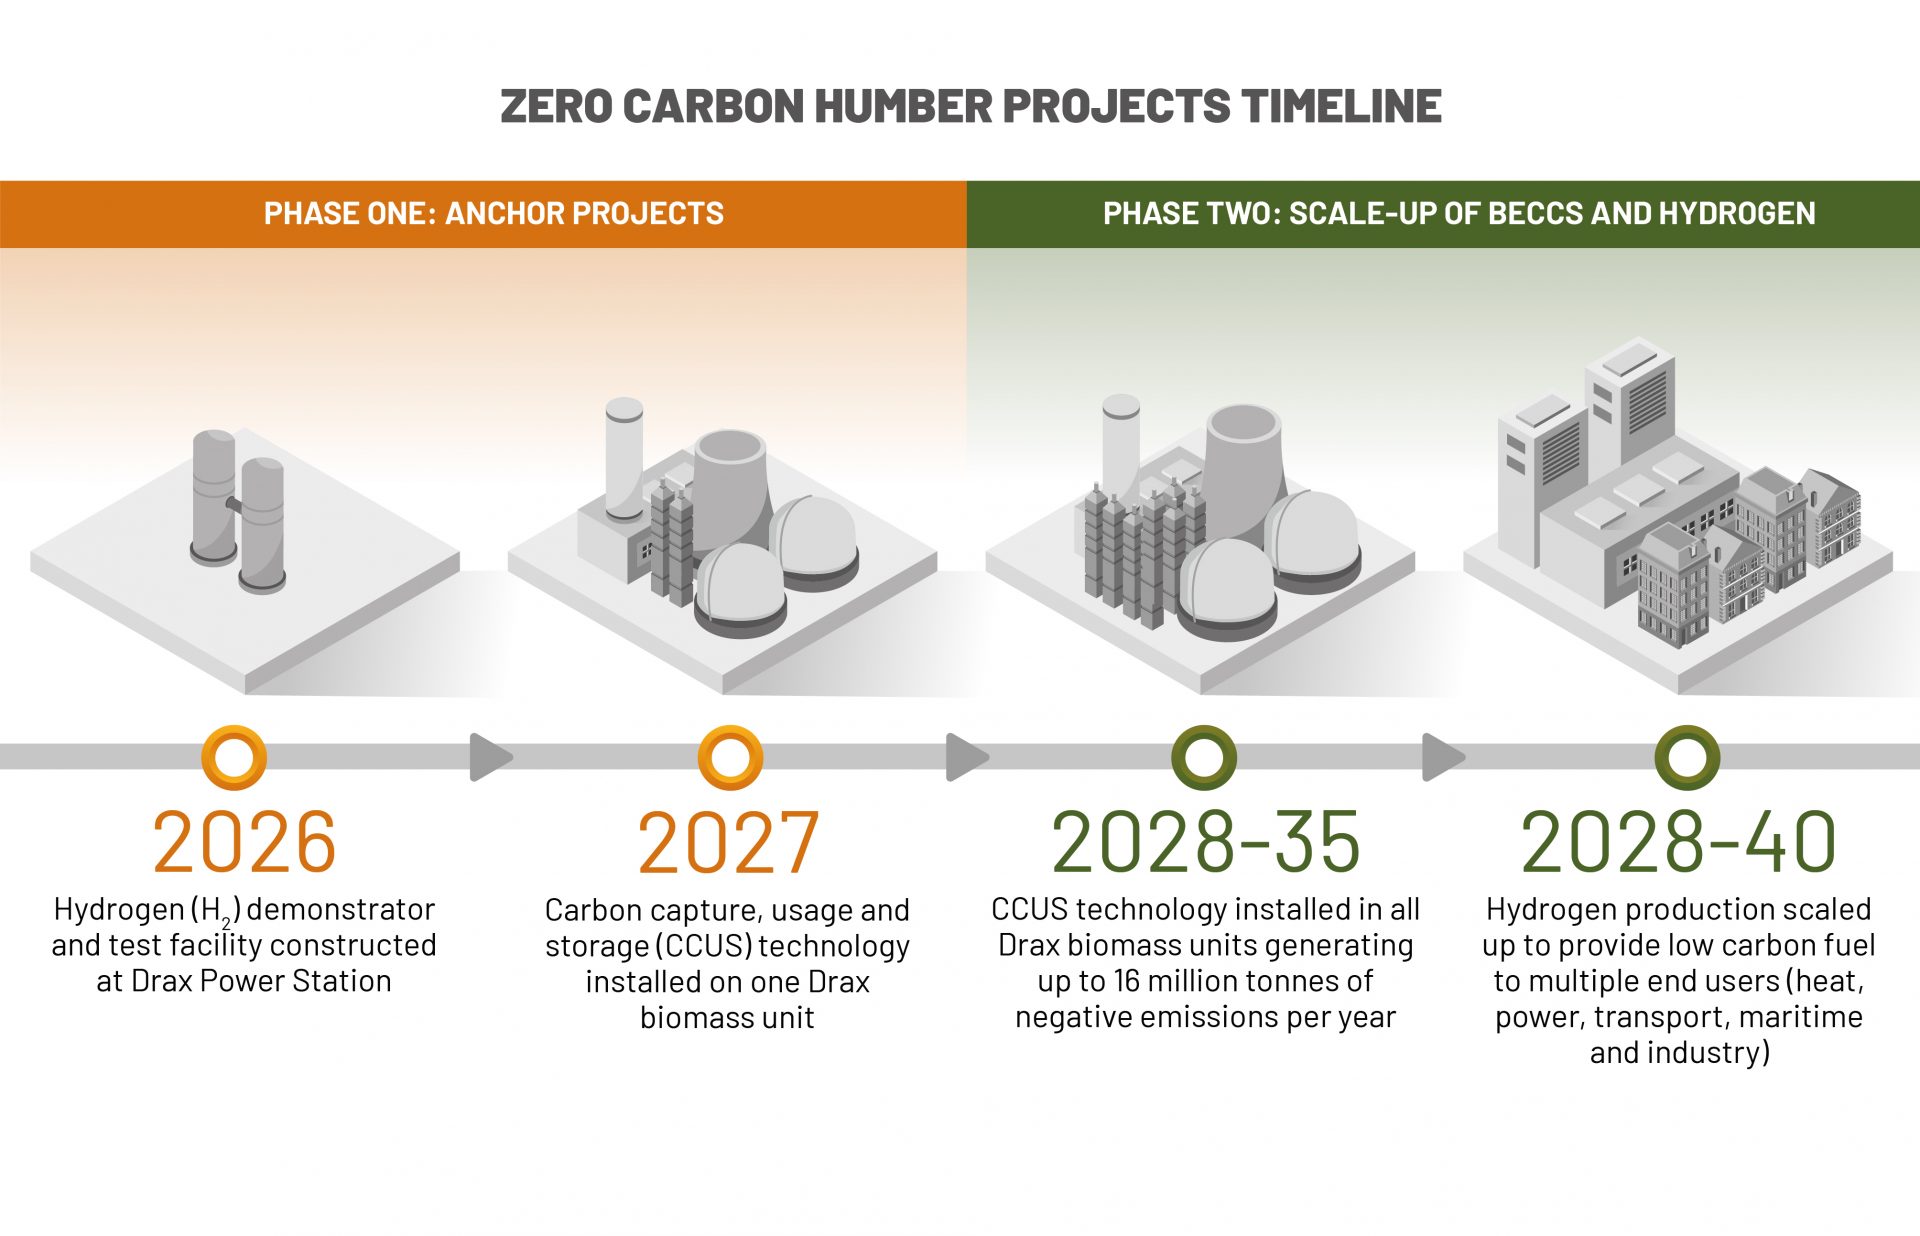 Zero Carbon Humber projects timeline